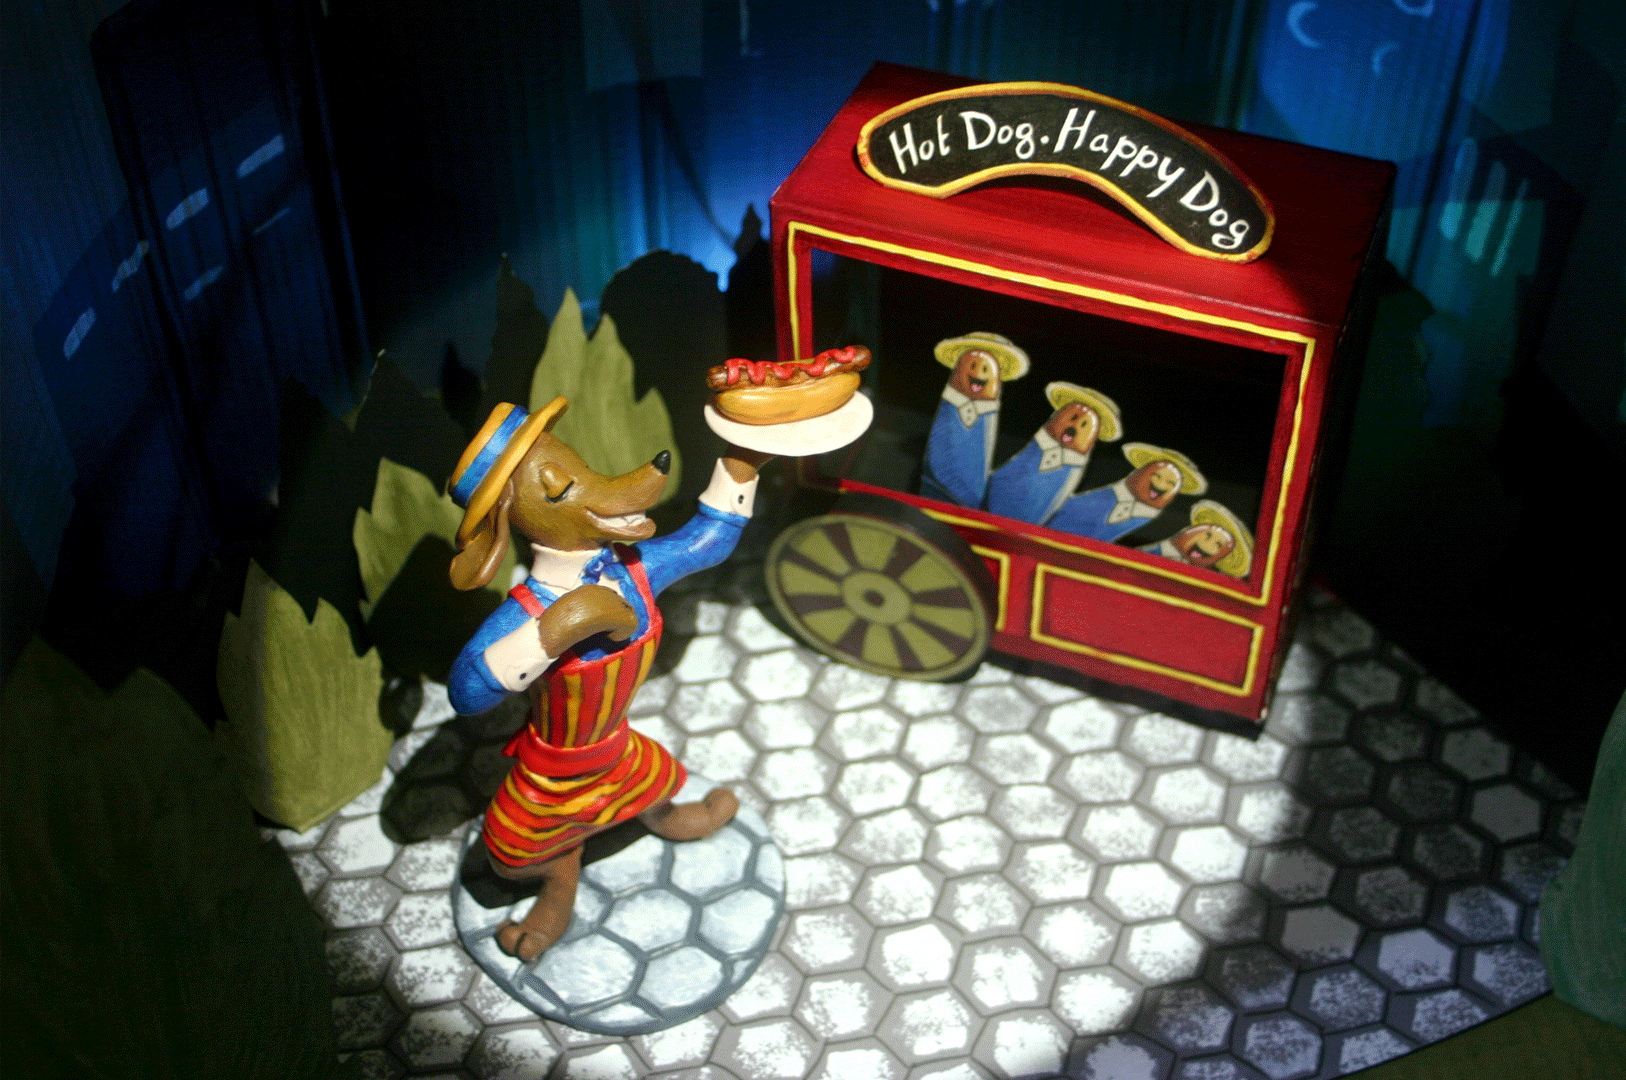 "Hot Dog, Happy Dog" Illustration of Joey, the hotdog vendor, and his happy sausages. 3D model, made with polymer clay, recycled cardboard and acrylic paint.